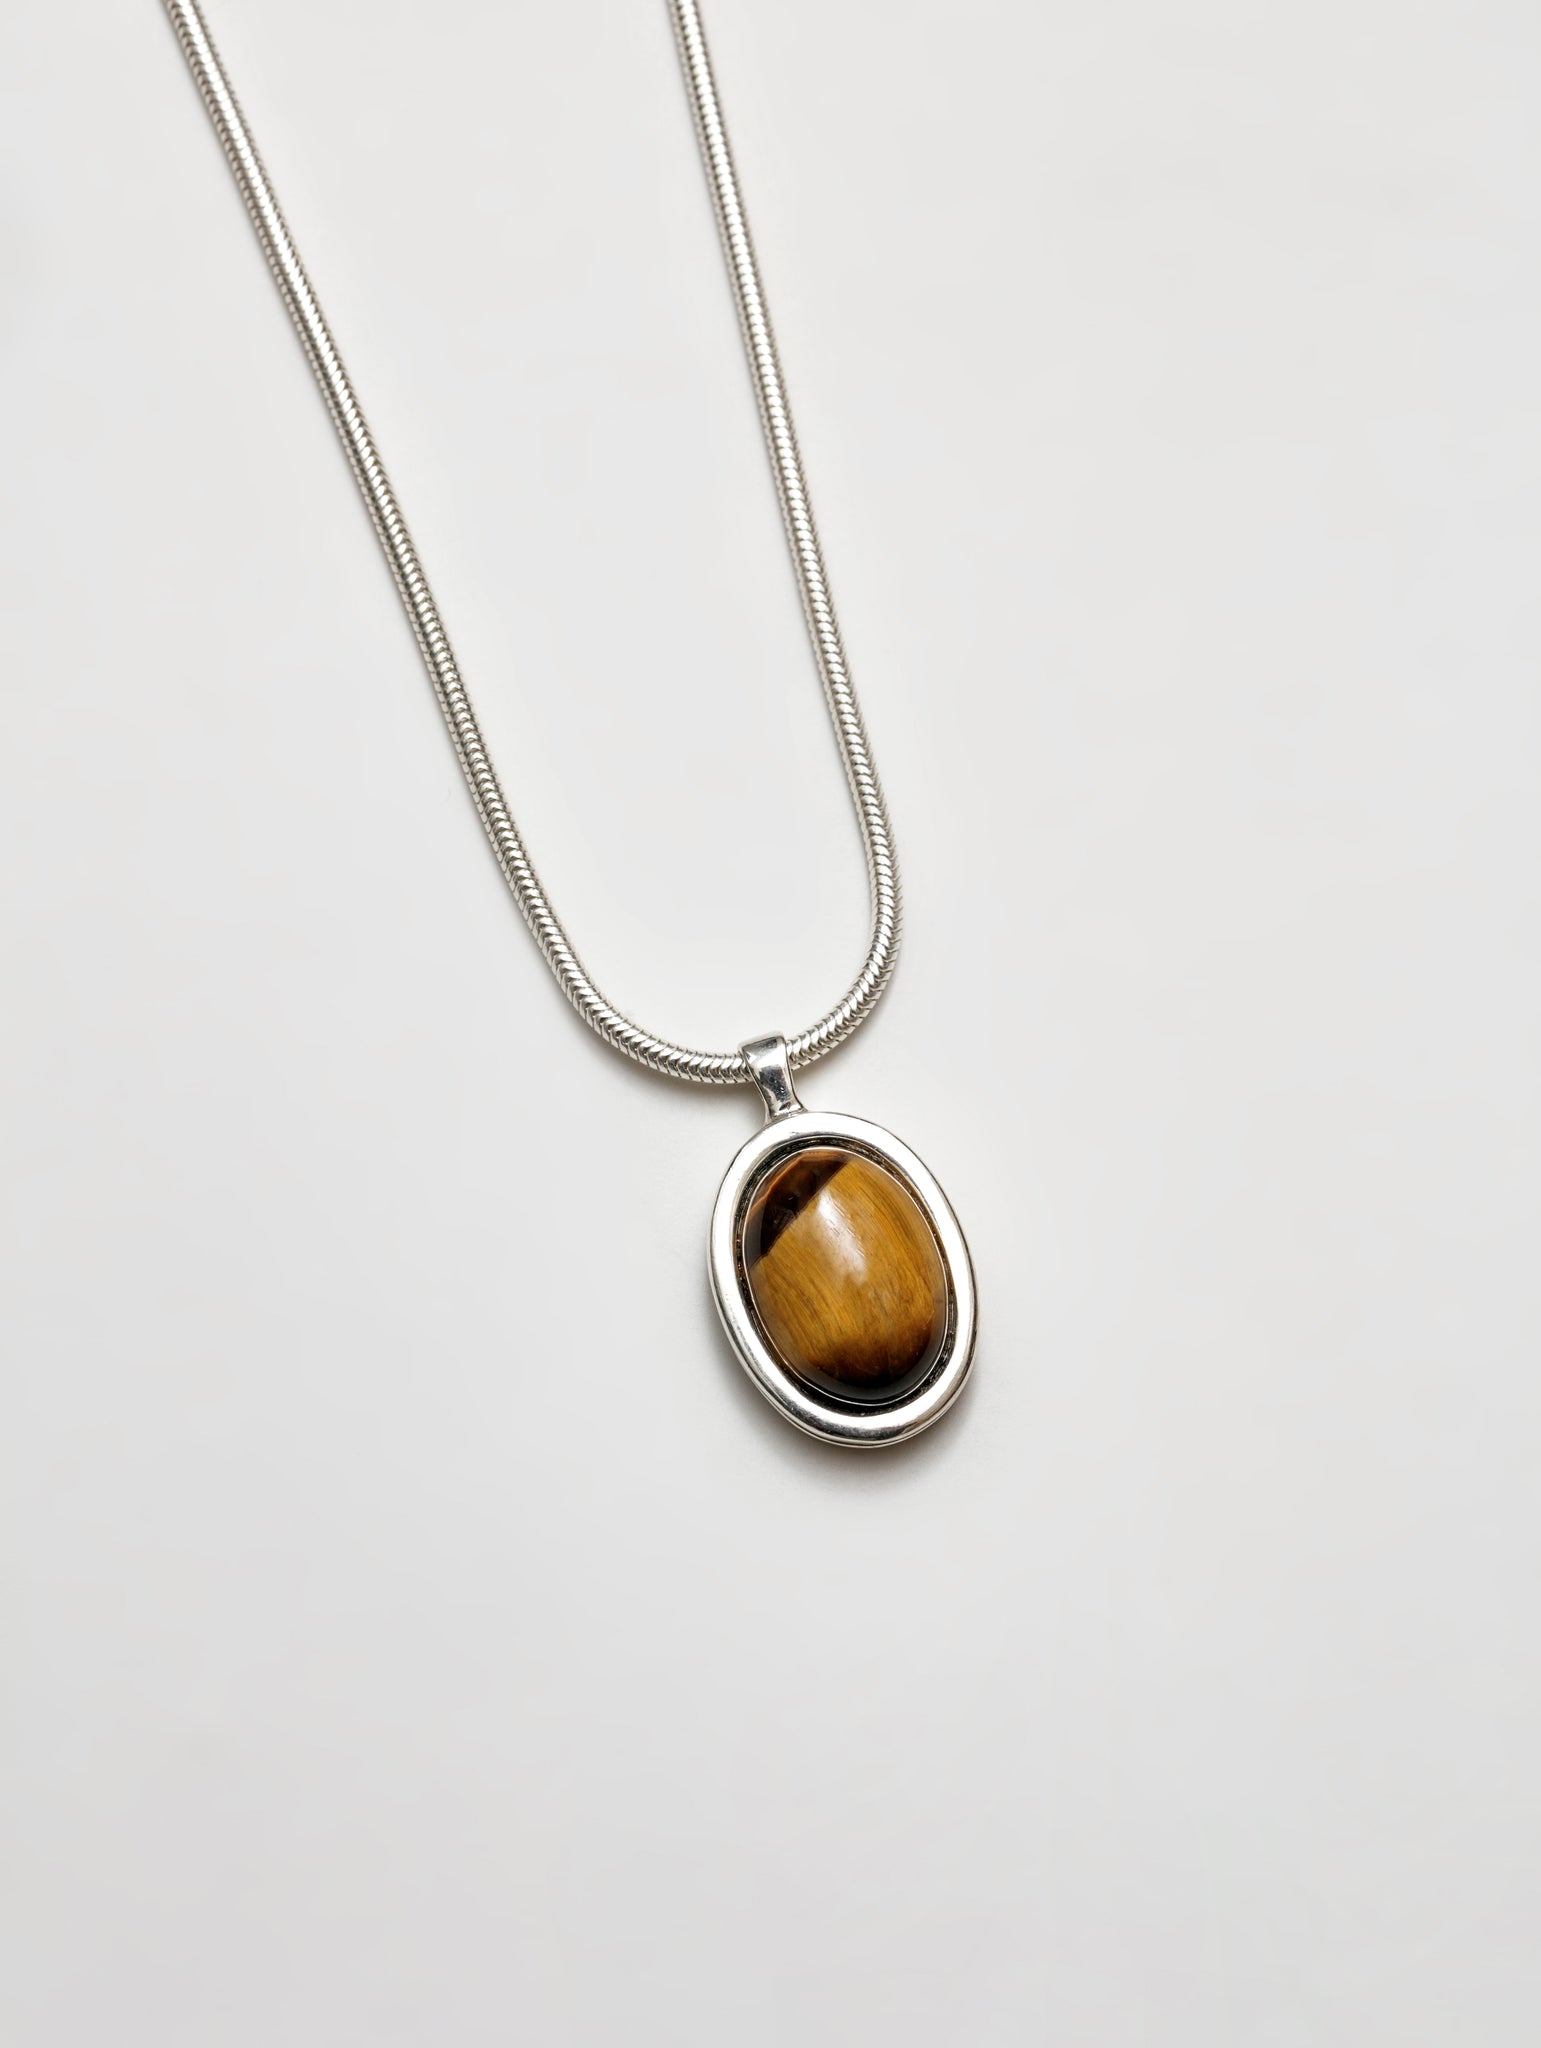 Wolf Circus Everyday Unisex Oval Tiger's Eye Pendant Necklace Brown Natural Gemstone 925 Sterling Silver Jewelry